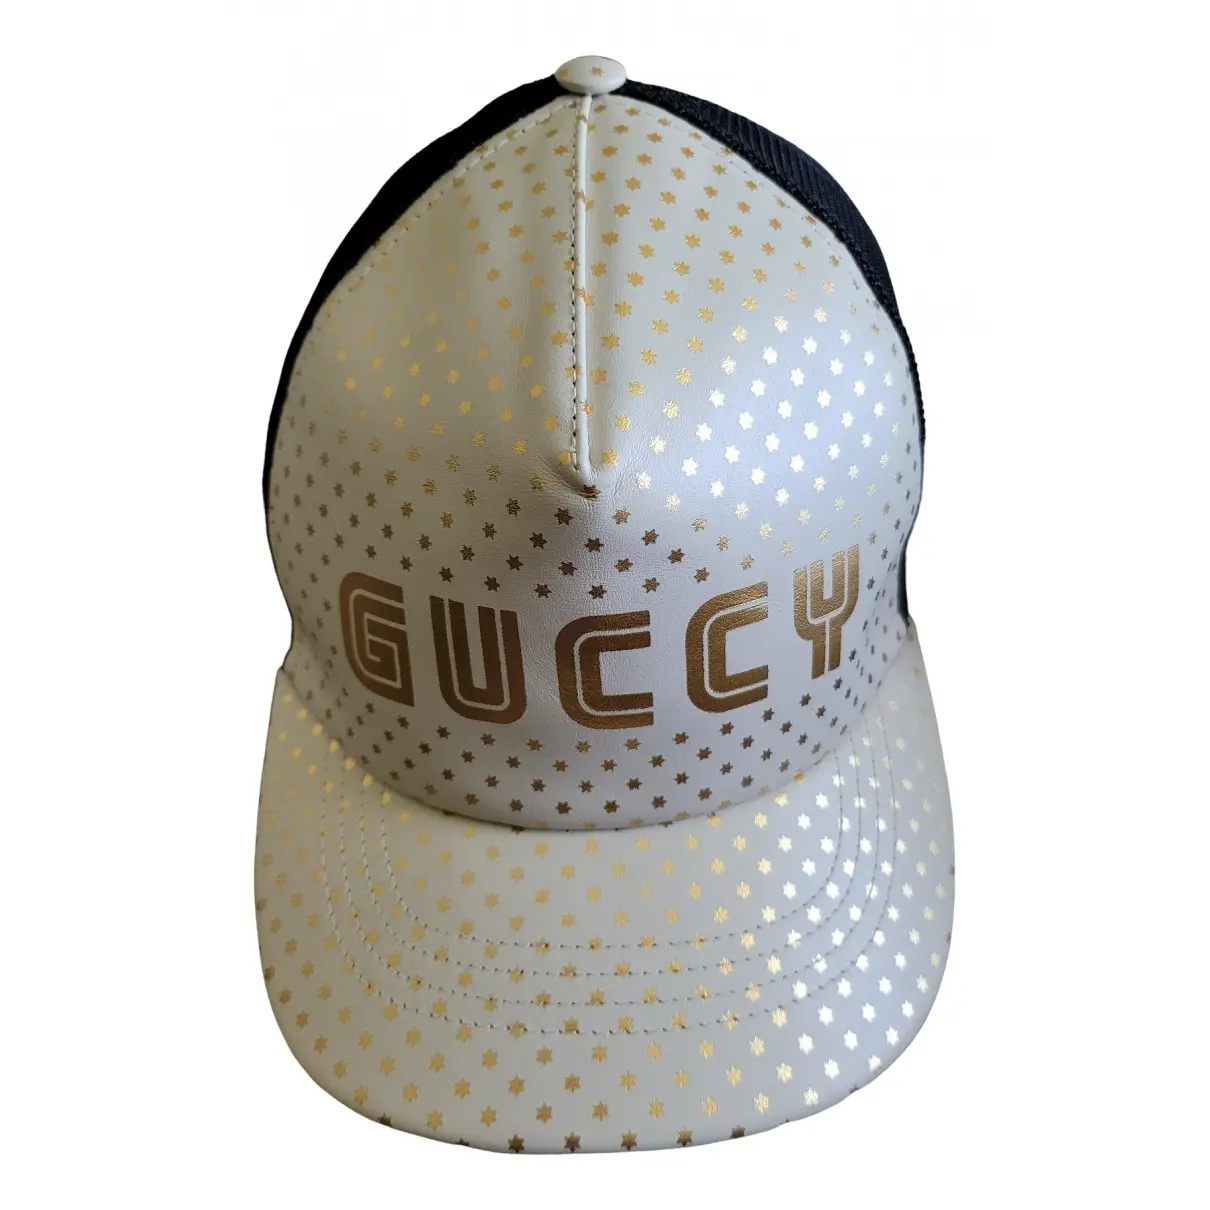 Patent leather hat Gucci